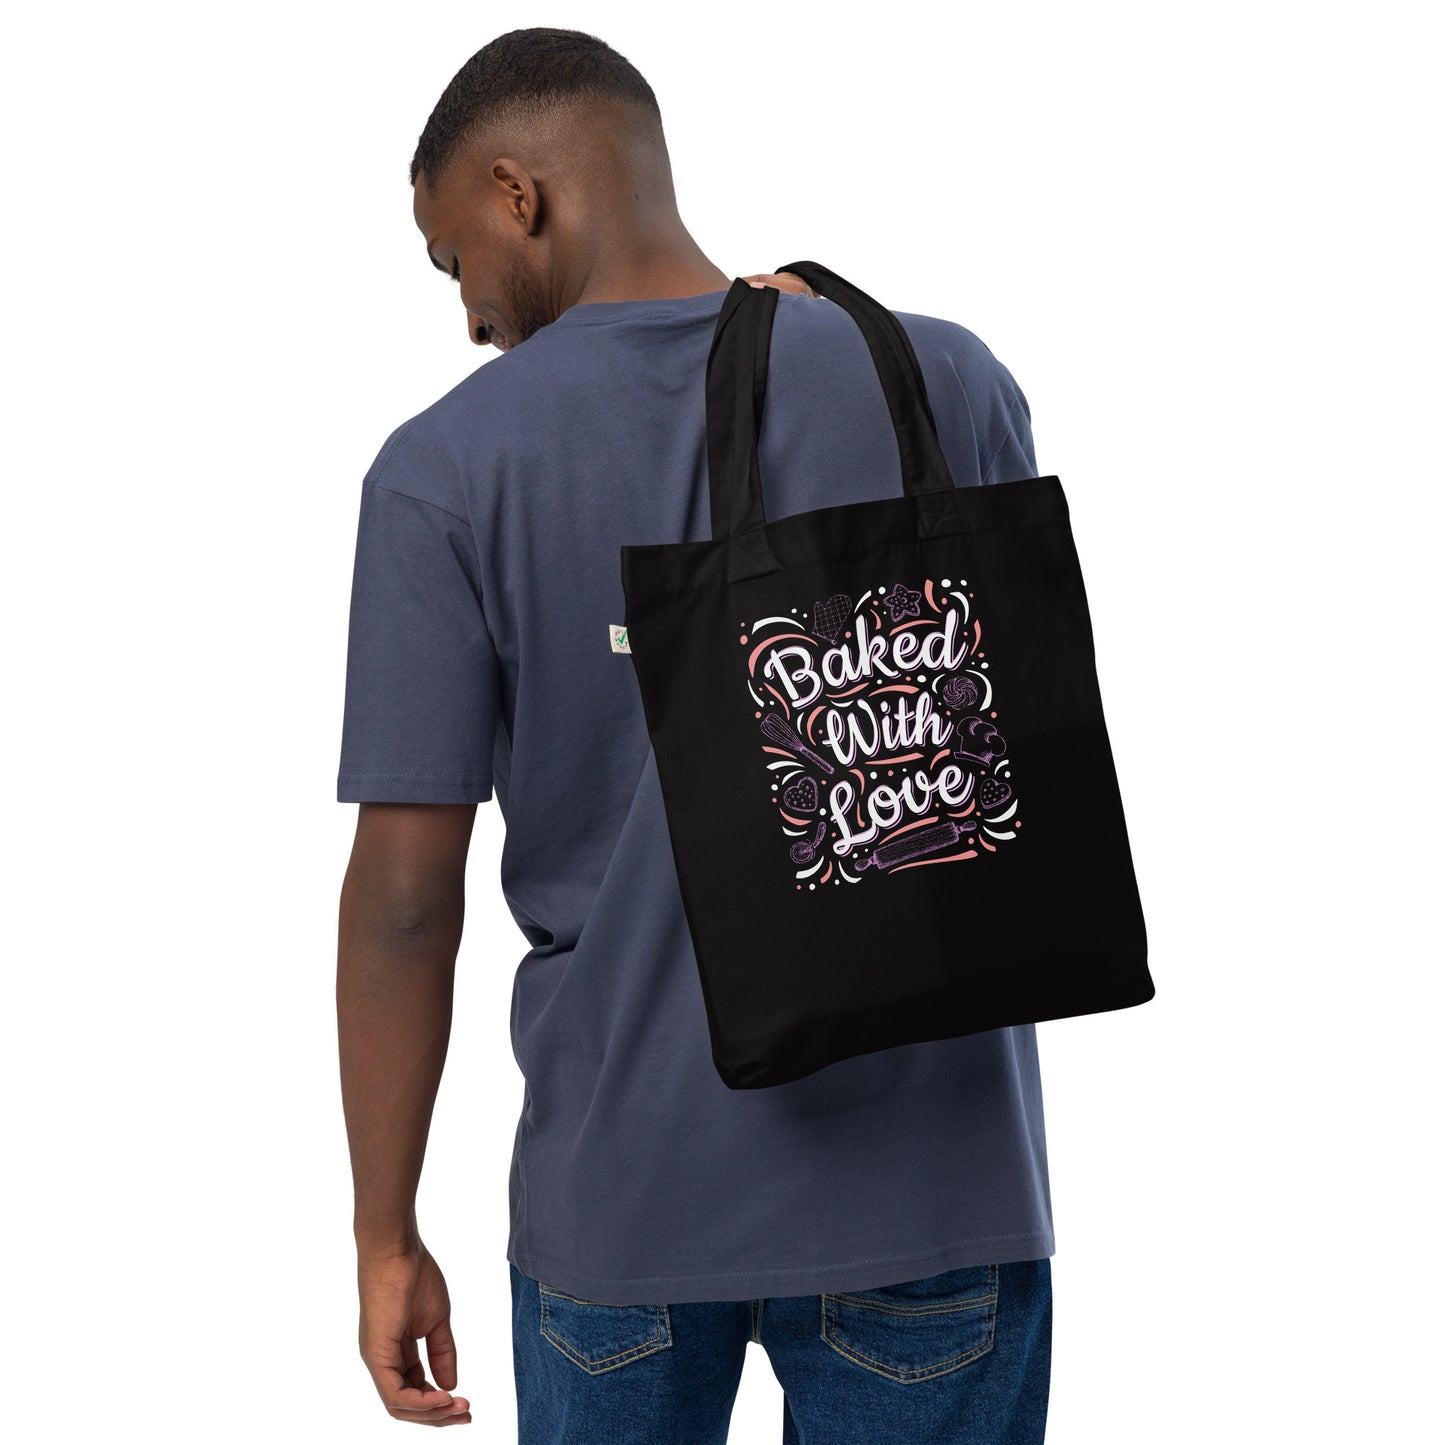 Baked with love - Organic fashion tote bag - HobbyMeFree